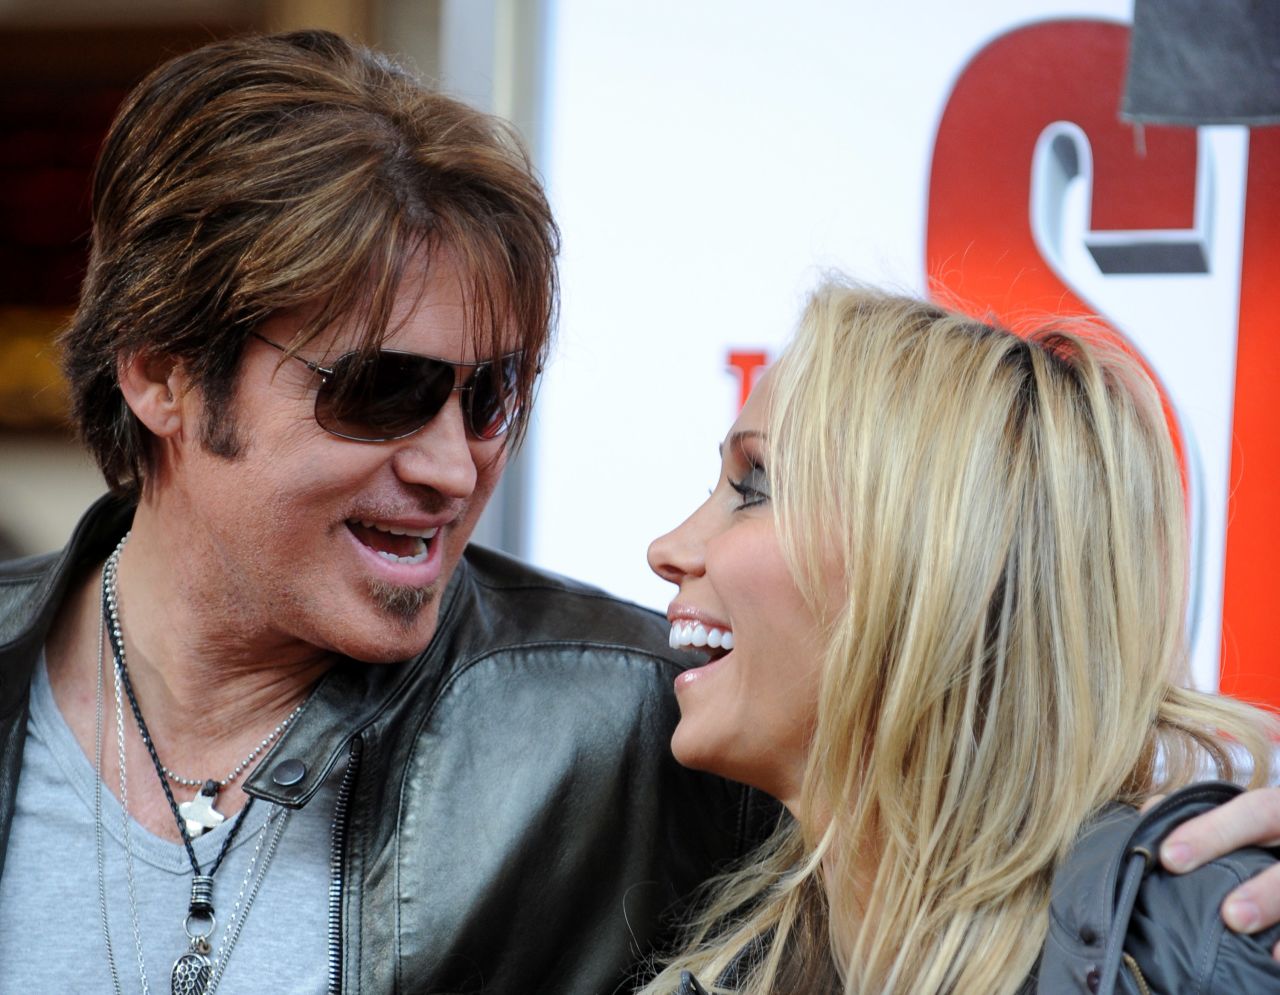 Billy Ray Cyrus and Tish Cyrus have tried to break up twice, and each time they ended up back together. In 2010, they announced they were breaking up after 17 years of marriage, but Billy Ray had a change of heart in March 2011 and wanted to reconcile. In June 2013, they tried to break up again, but <a href="http://www.eonline.com/news/441105/billy-ray-and-tish-cyrus-scrap-divorce-say-couples-therapy-helped-get-relationship-back-on-track" target="_blank" target="_blank">with couples therapy</a>, they managed to make it work.